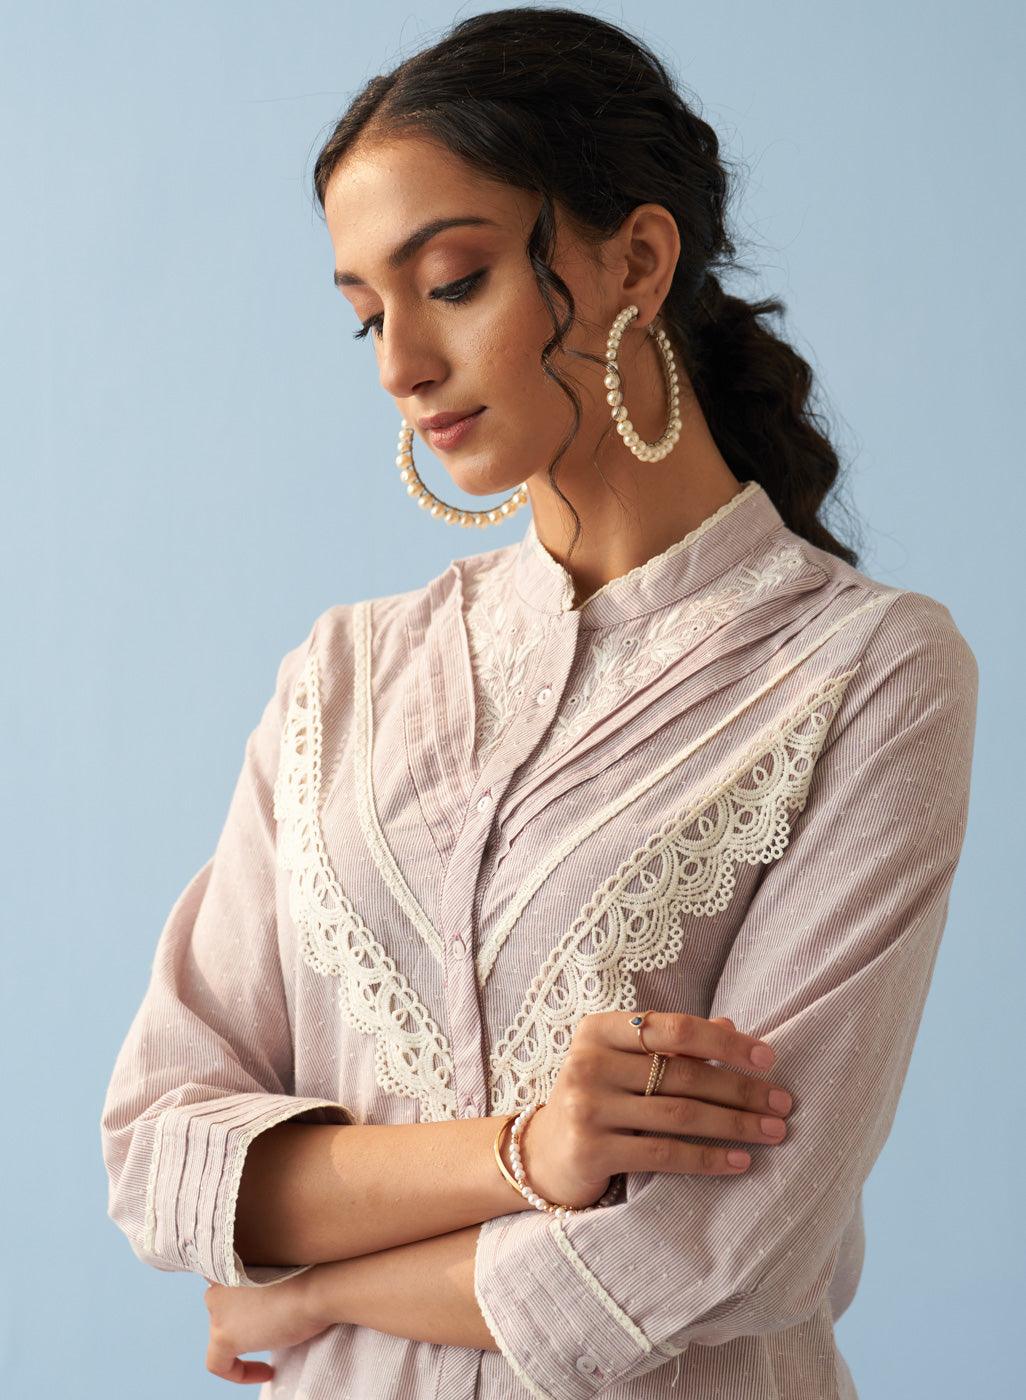 Lavender Embroidered Shirt with Lace Detailing
